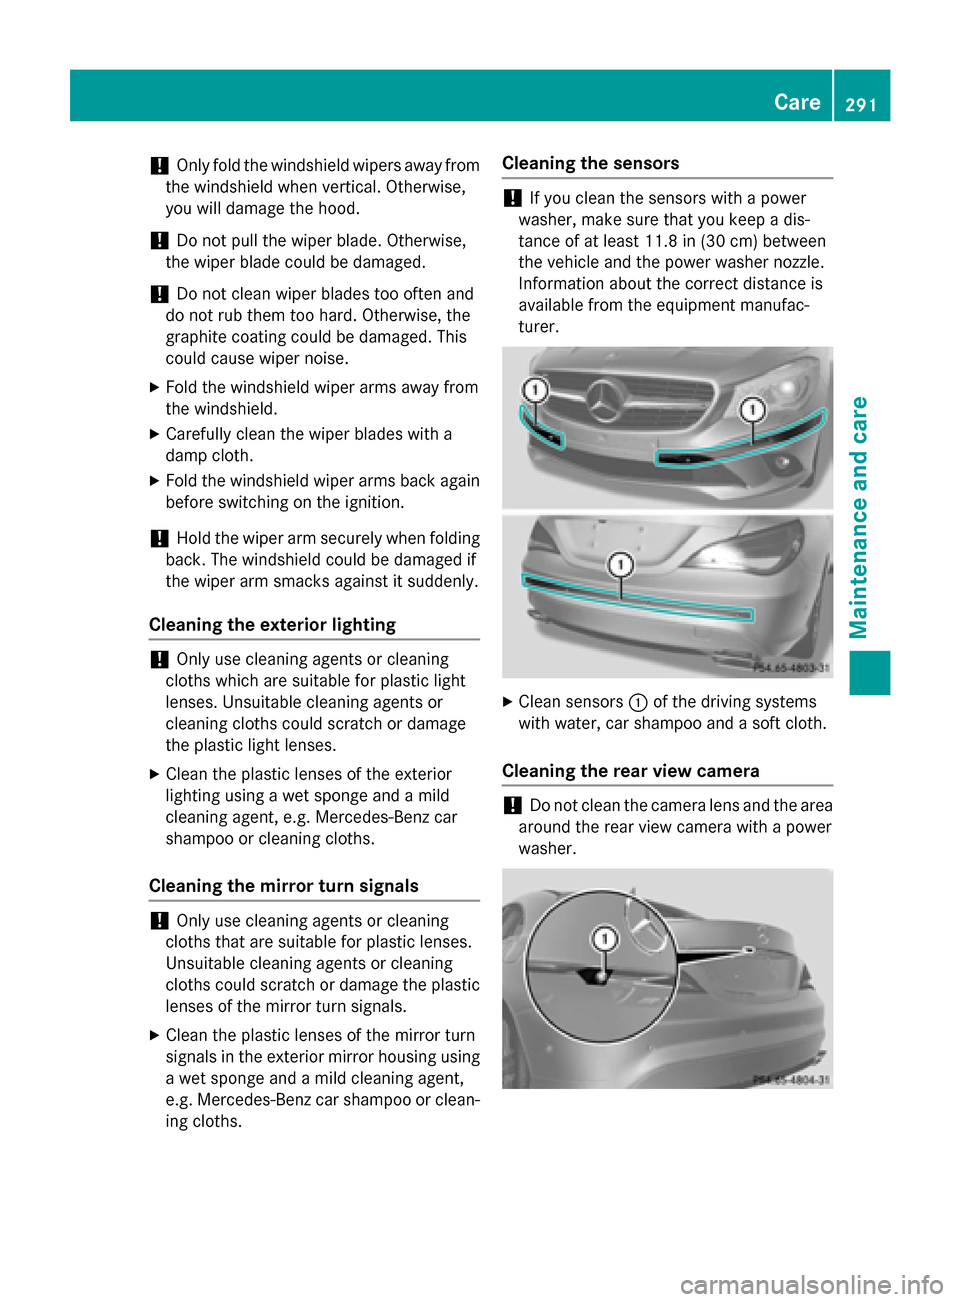 MERCEDES-BENZ CLA-Class 2014 C117 Owners Manual !
Only fold the windshield wipers away from
the windshield when vertical. Otherwise,
you will damage the hood.
! Do not pull the wiper blade. Otherwise,
the wiper blade could be damaged.
! Do not clea